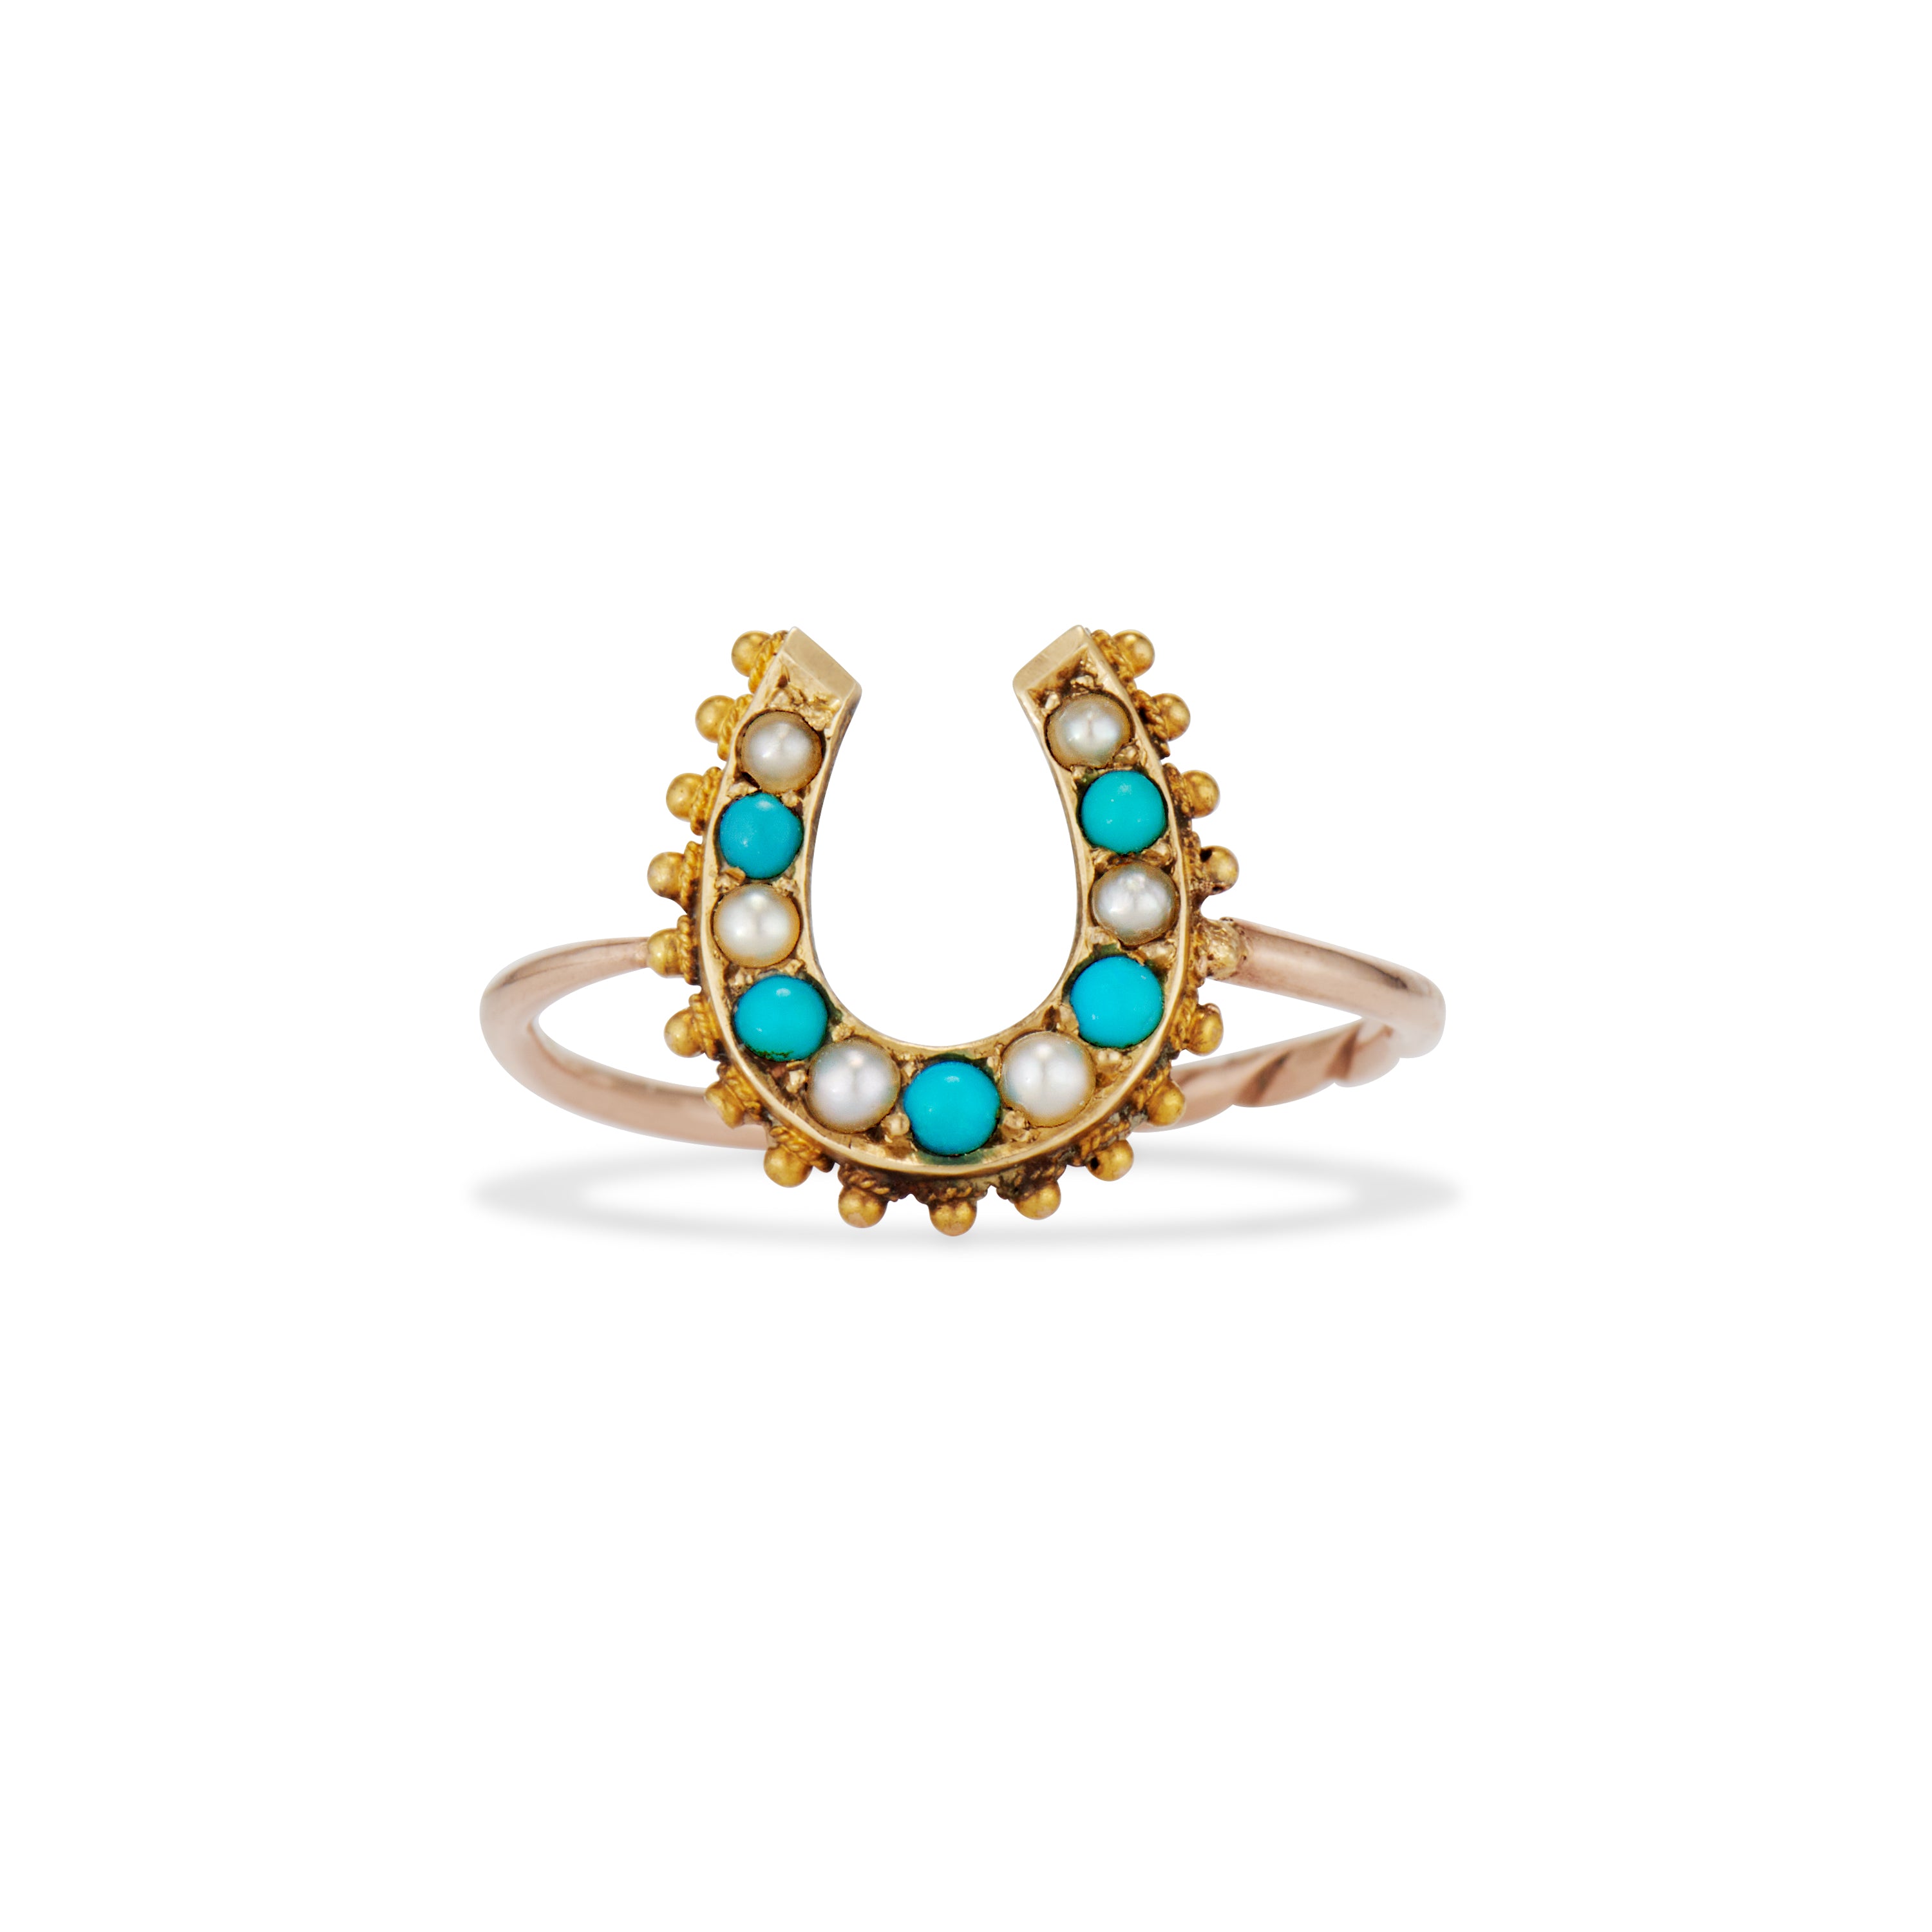 Pearl and Turquoise Horseshoe Ring